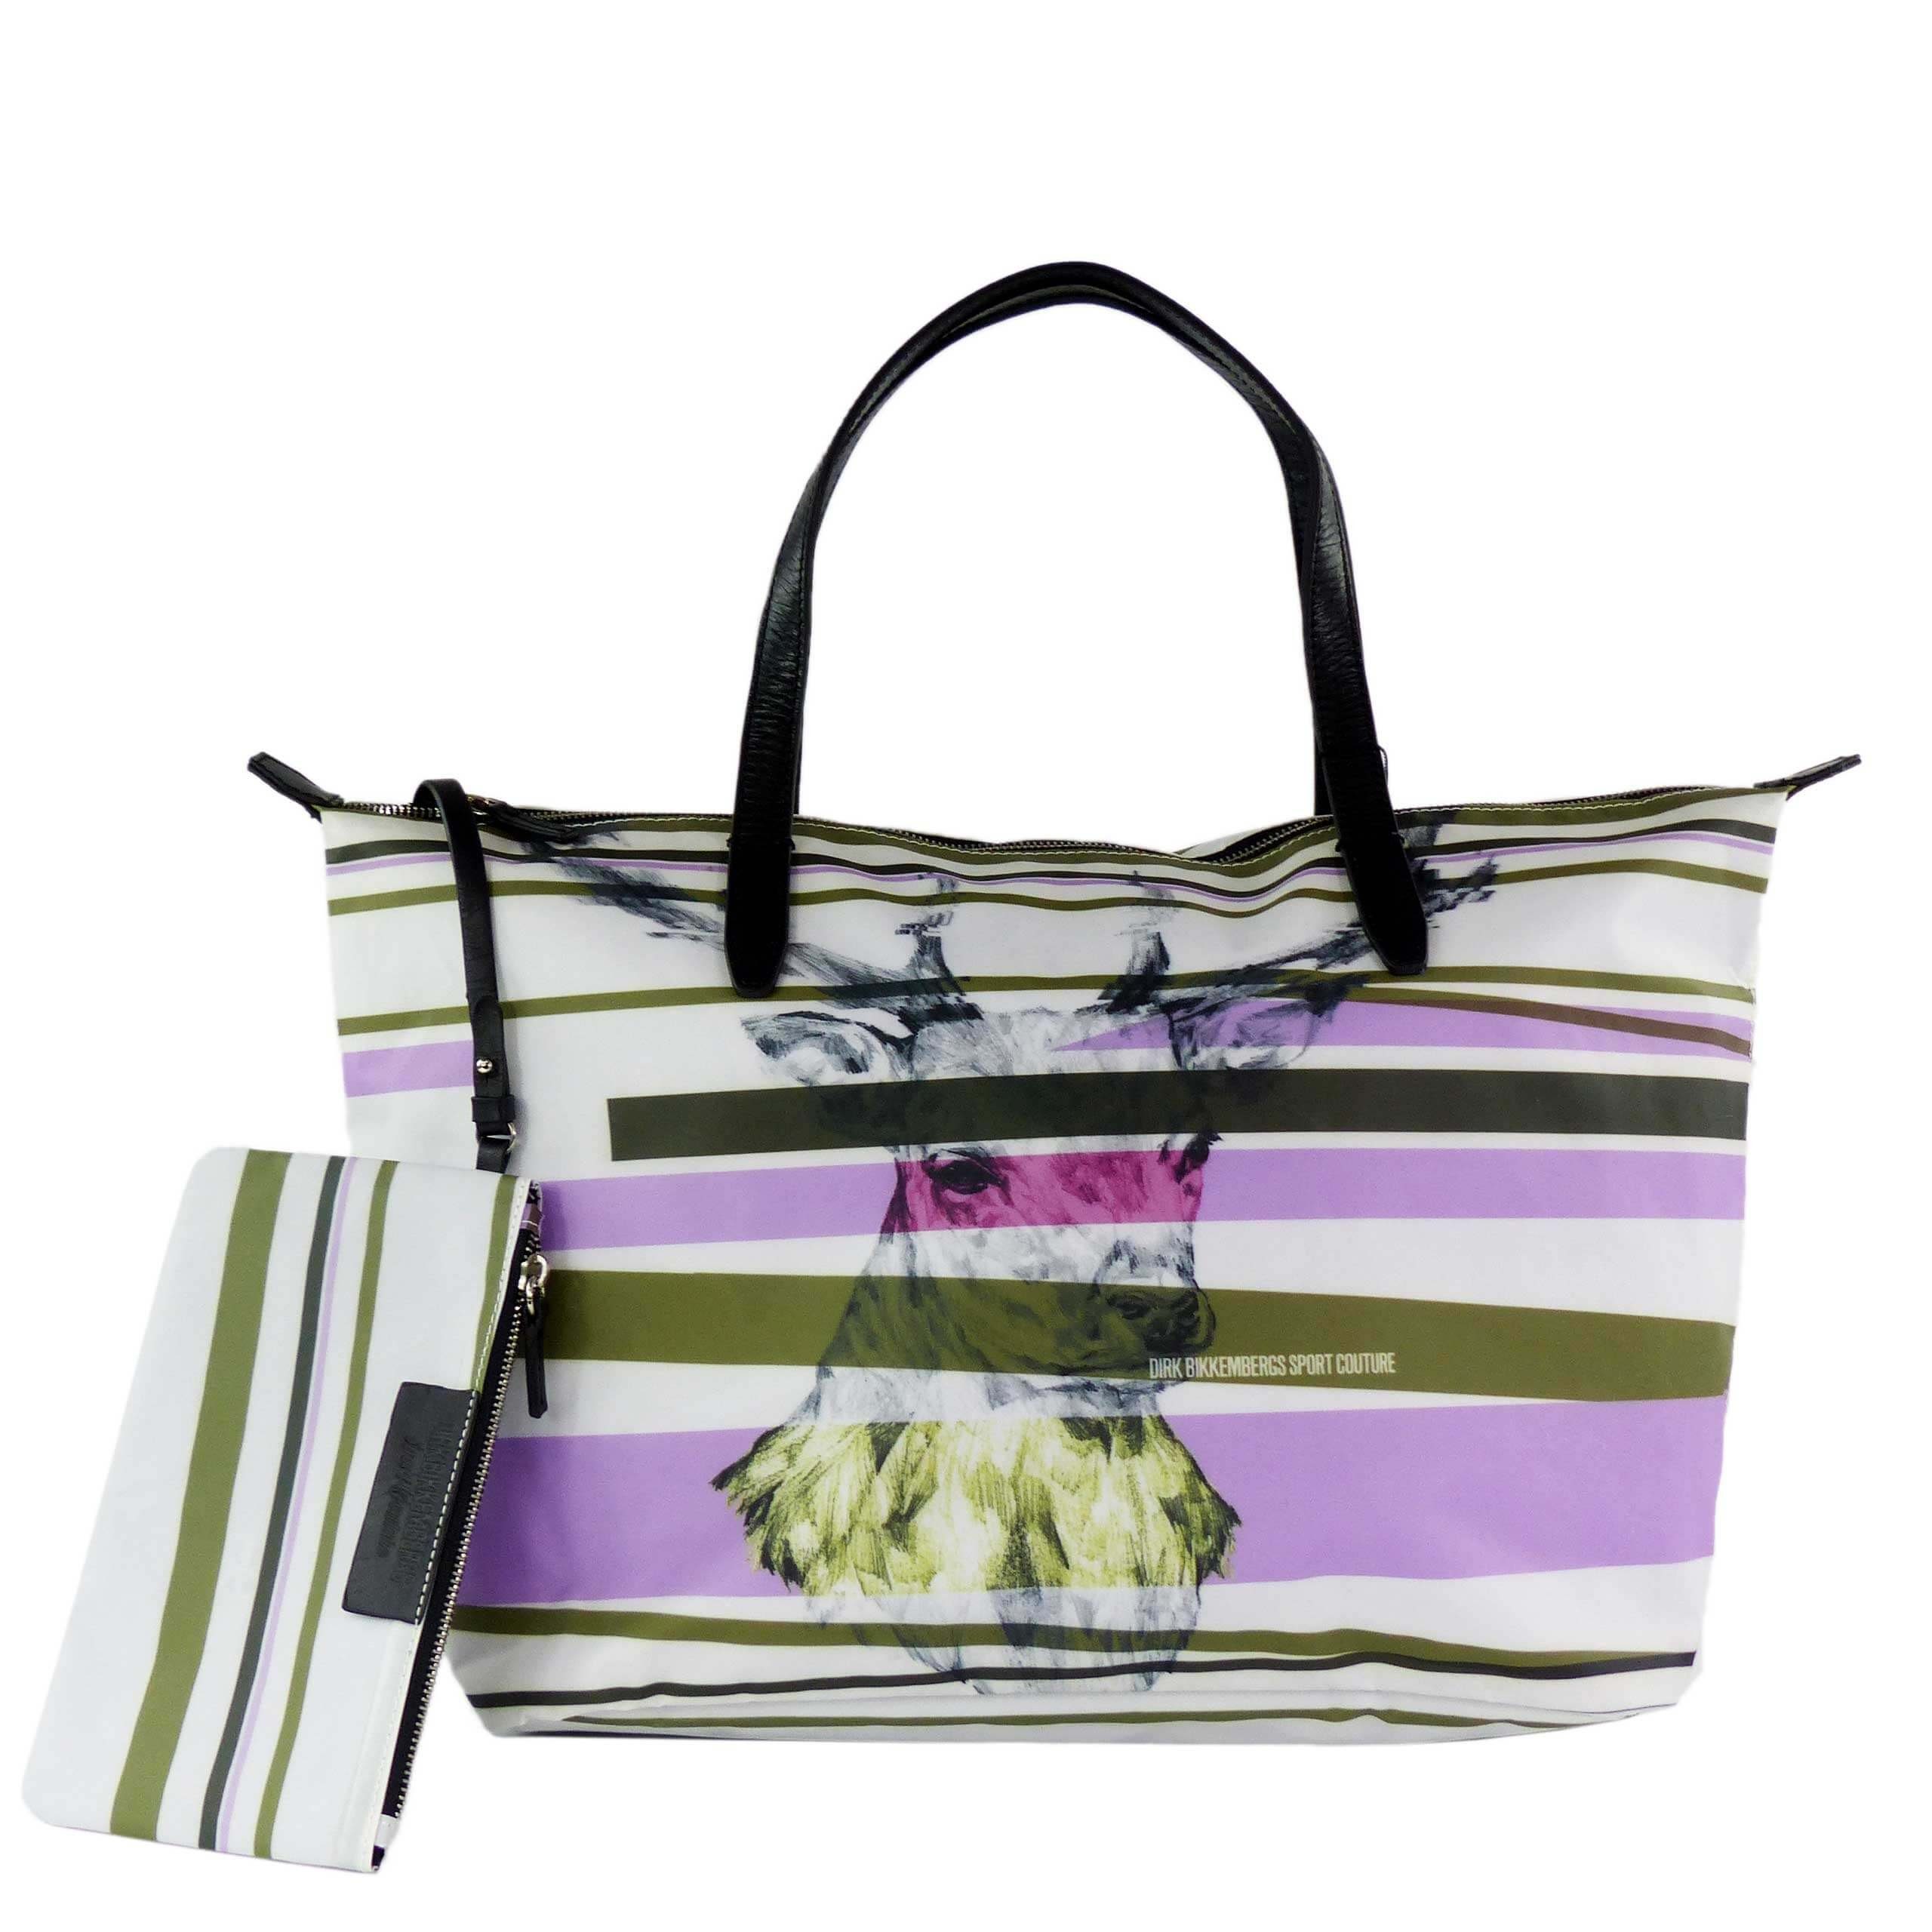 Bikkembergs Shopper Sport Couture Ice Shopper with Zip Stripes Deer